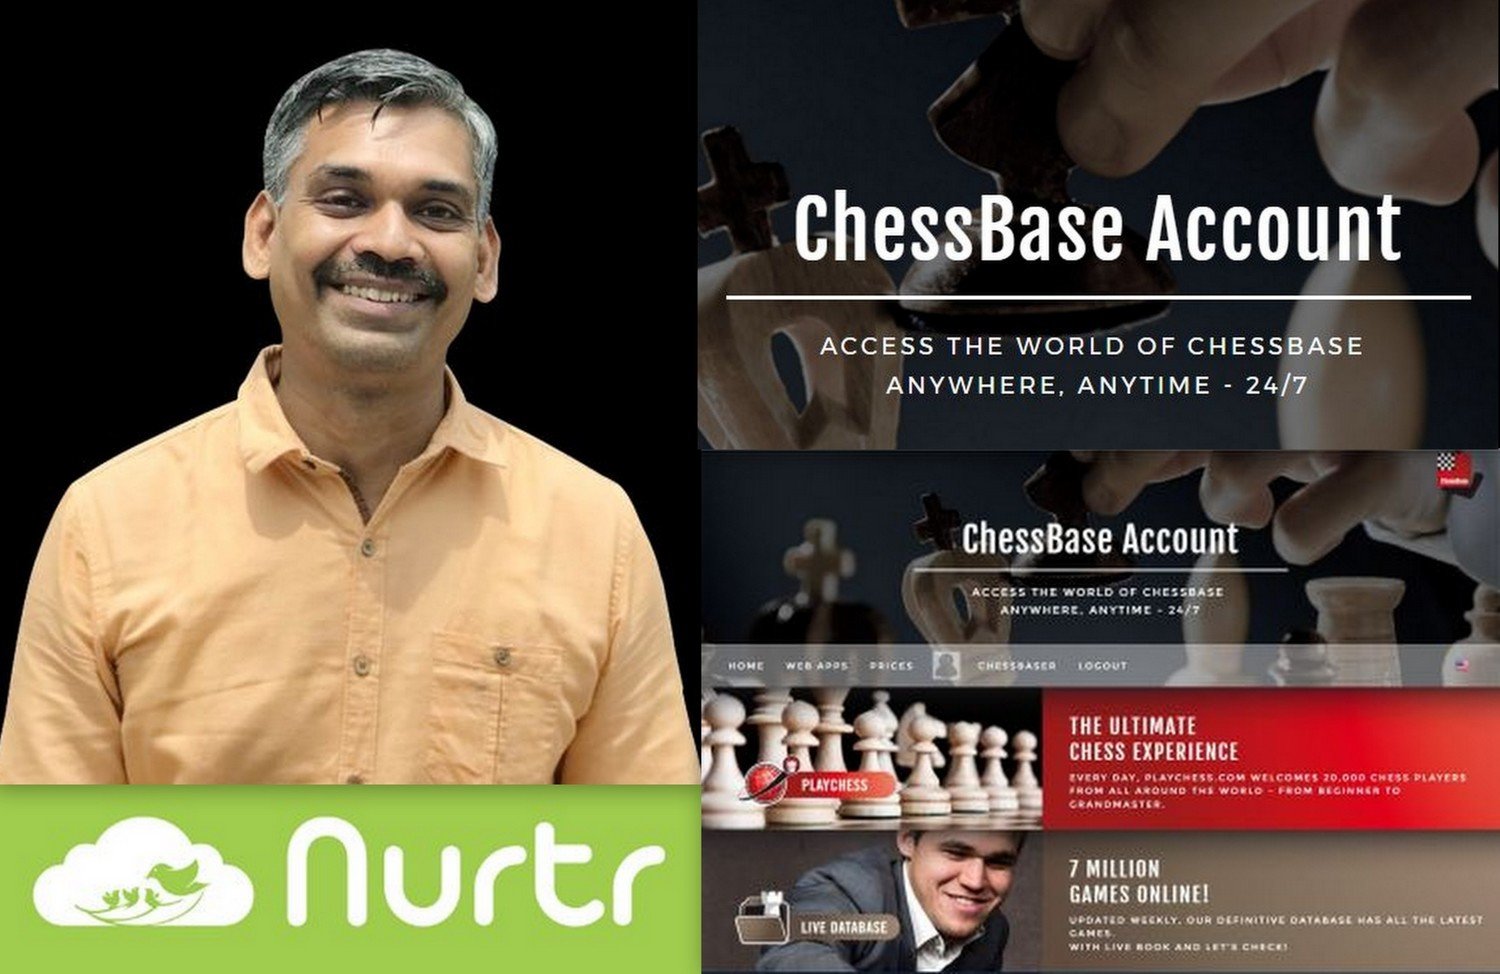 ChessBase Account - Video overview of Playchess